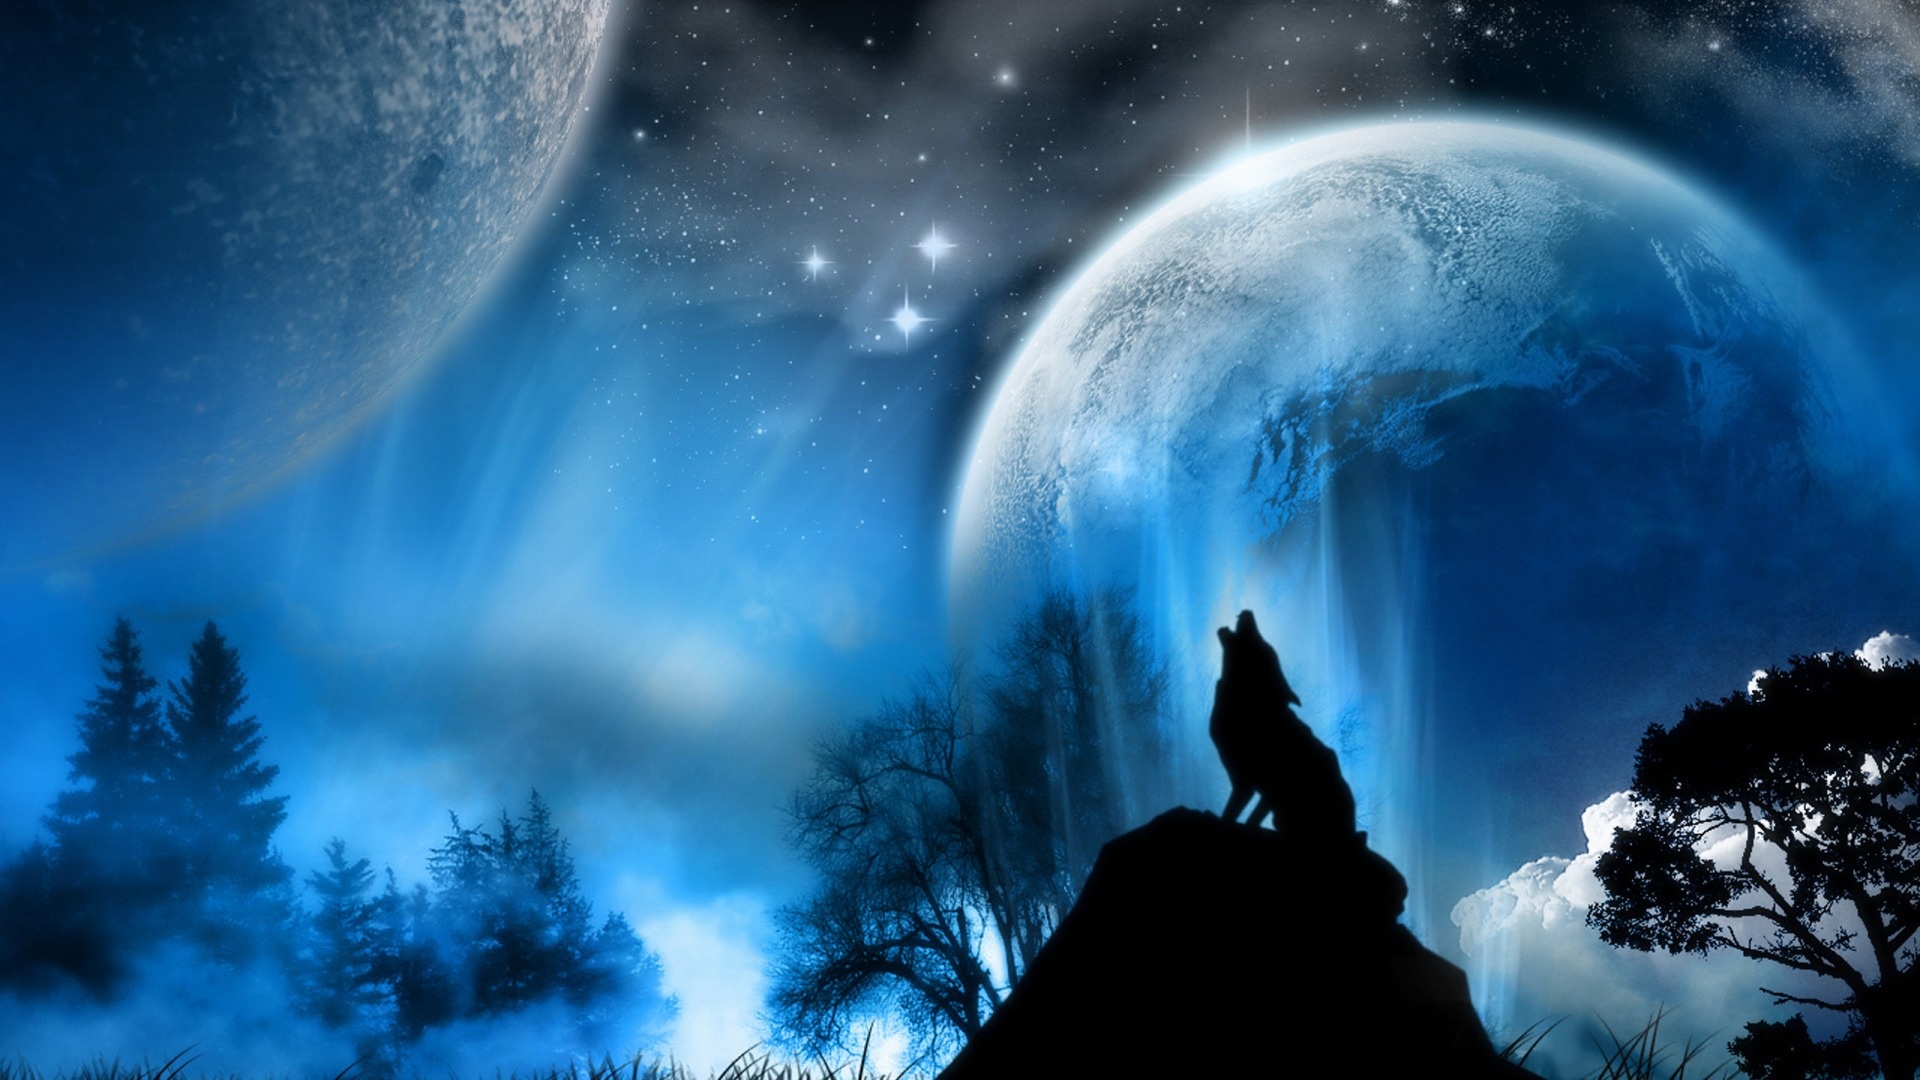 desktop hd free wolf wallpaper for android title desktop hd free wolf